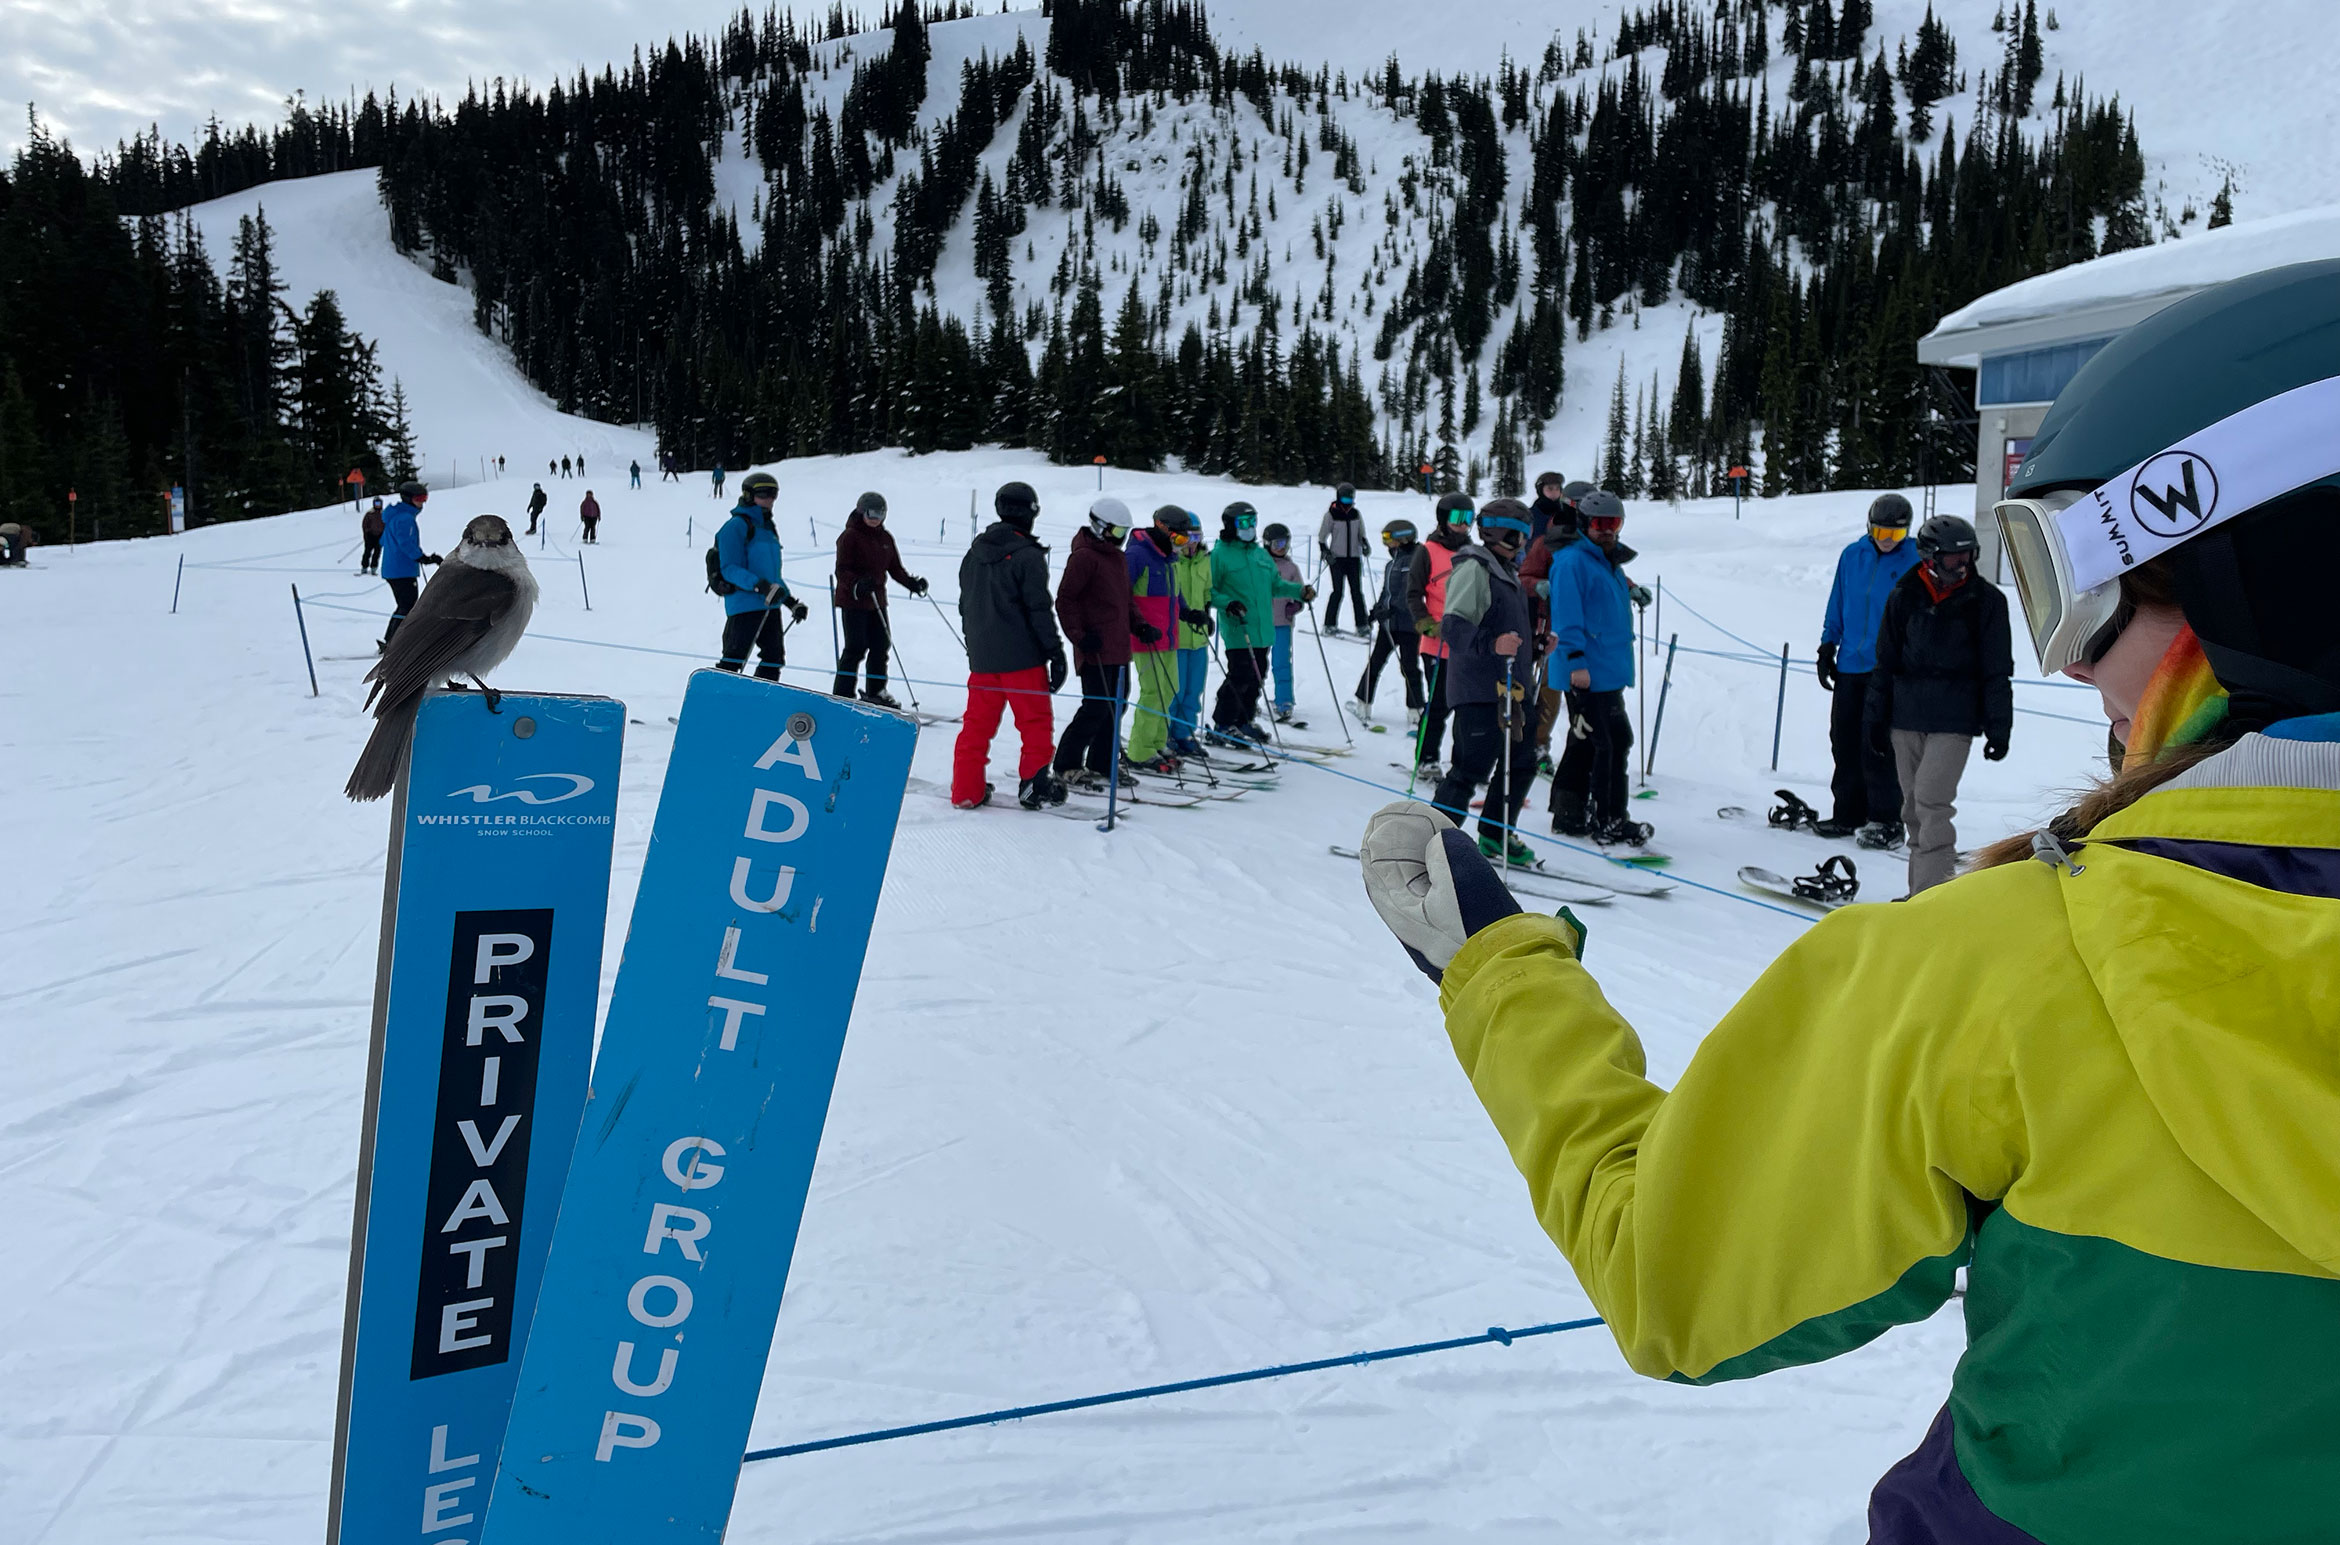 A whiskey jack lands close to a skier waiting in line on Whistler Blackcomb.